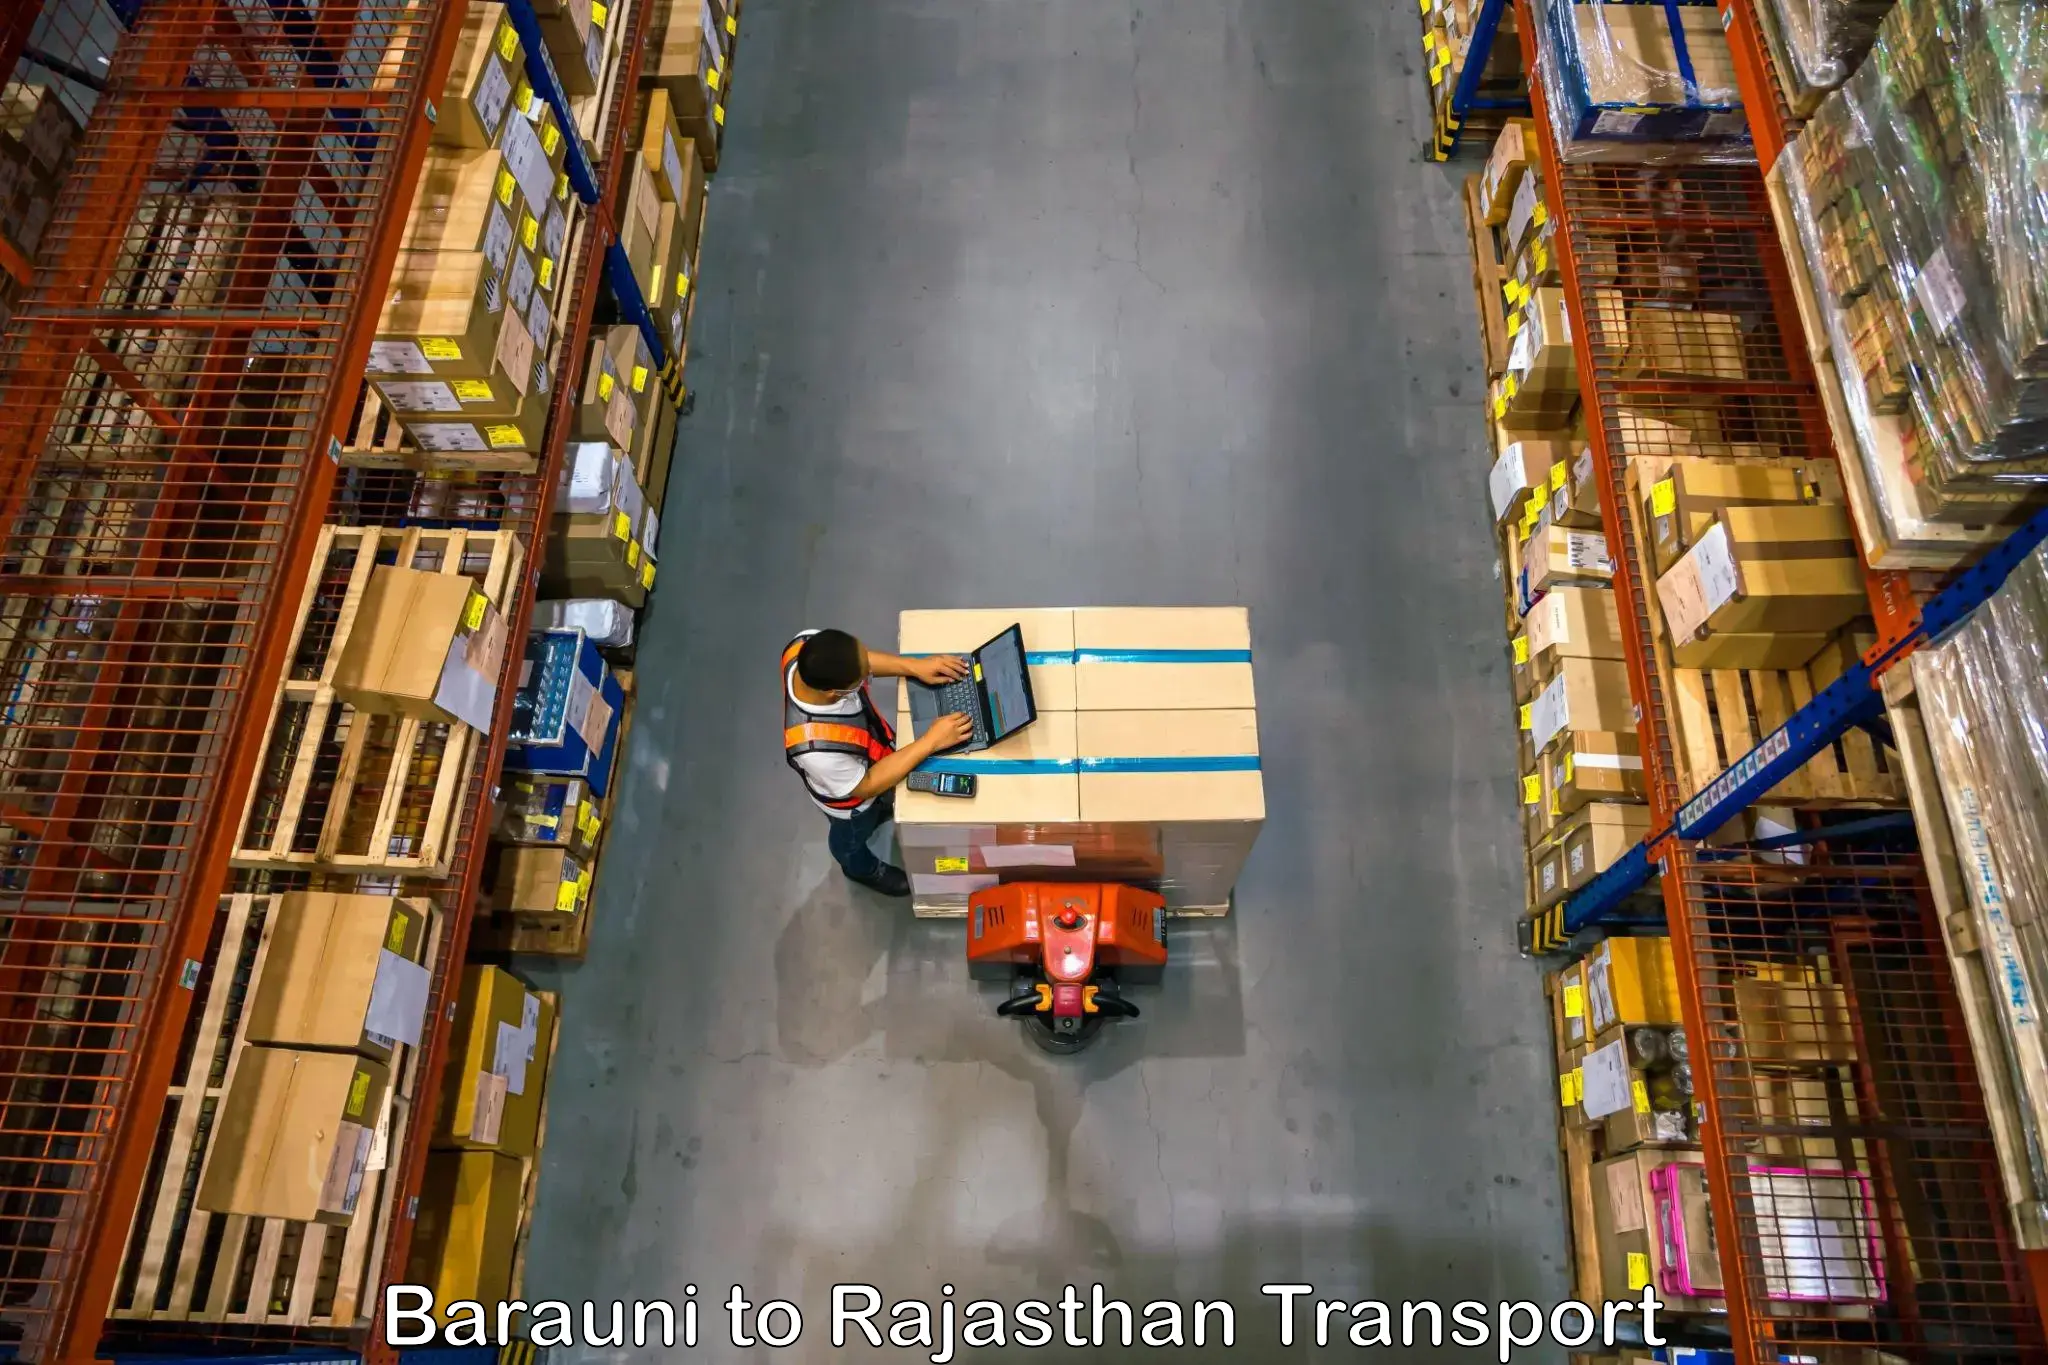 Truck transport companies in India Barauni to Dholpur